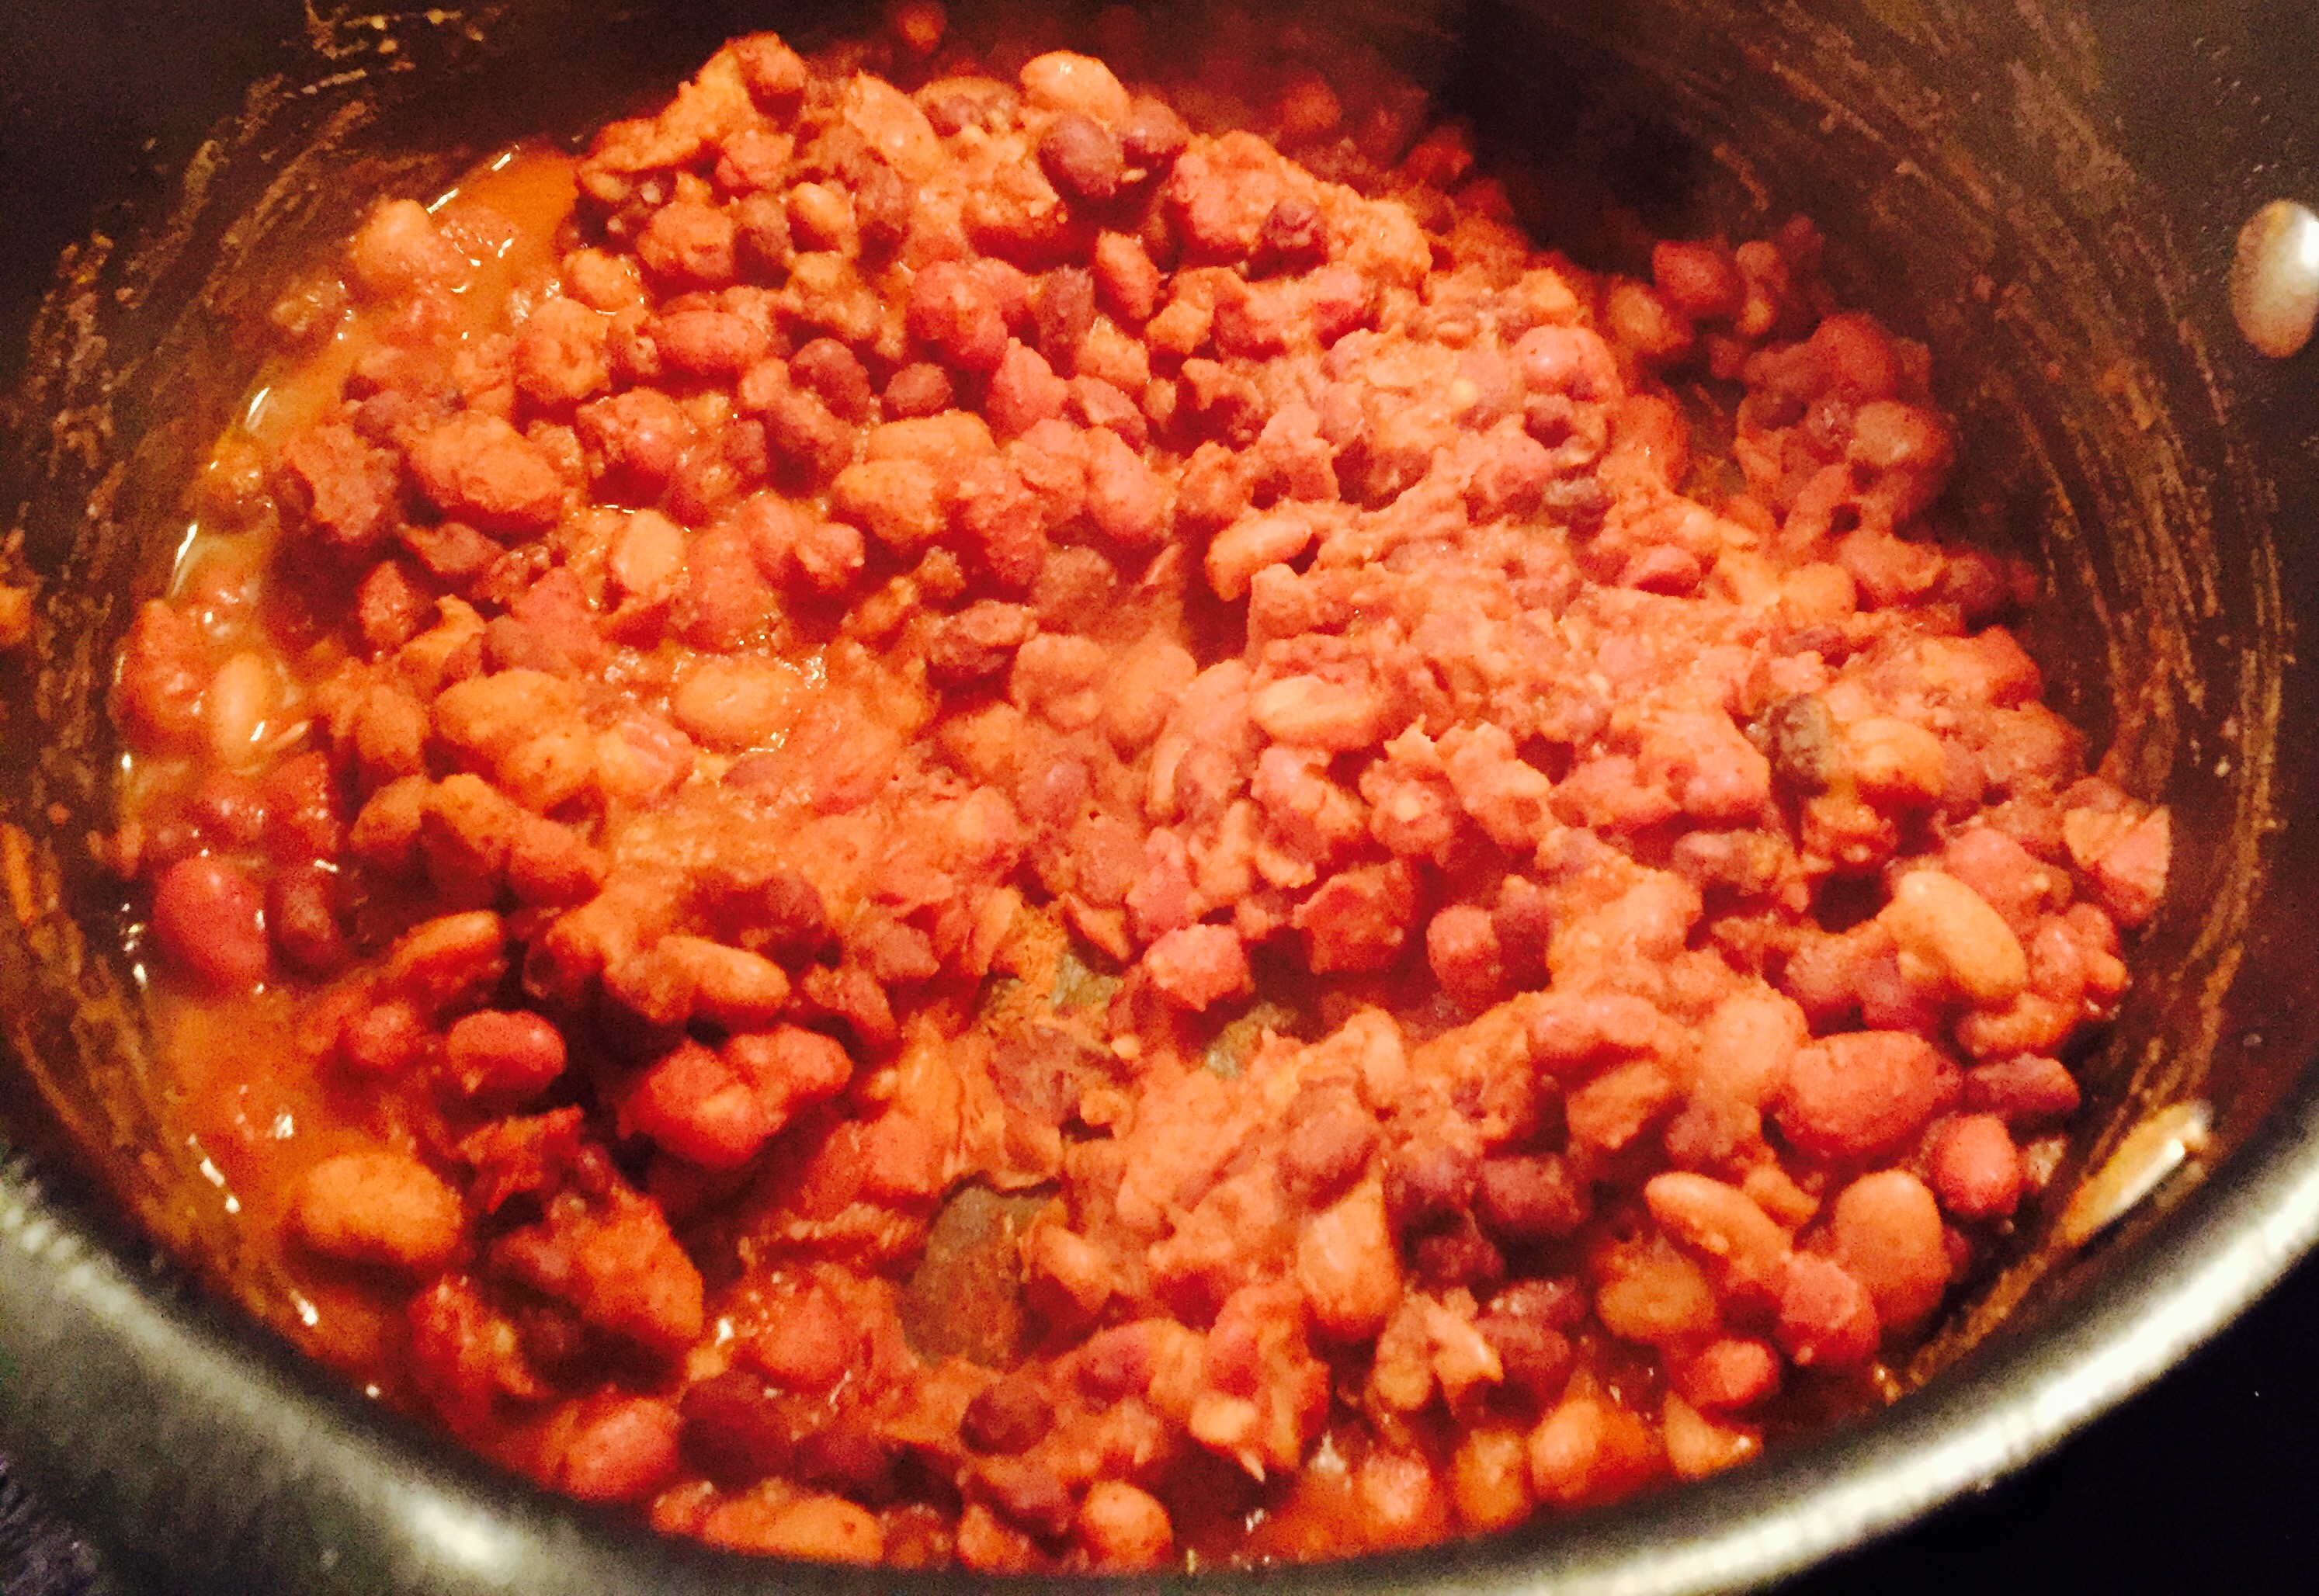 Quick stovetop chili ... minus the tomatoes ... which I actually had after all, doh!